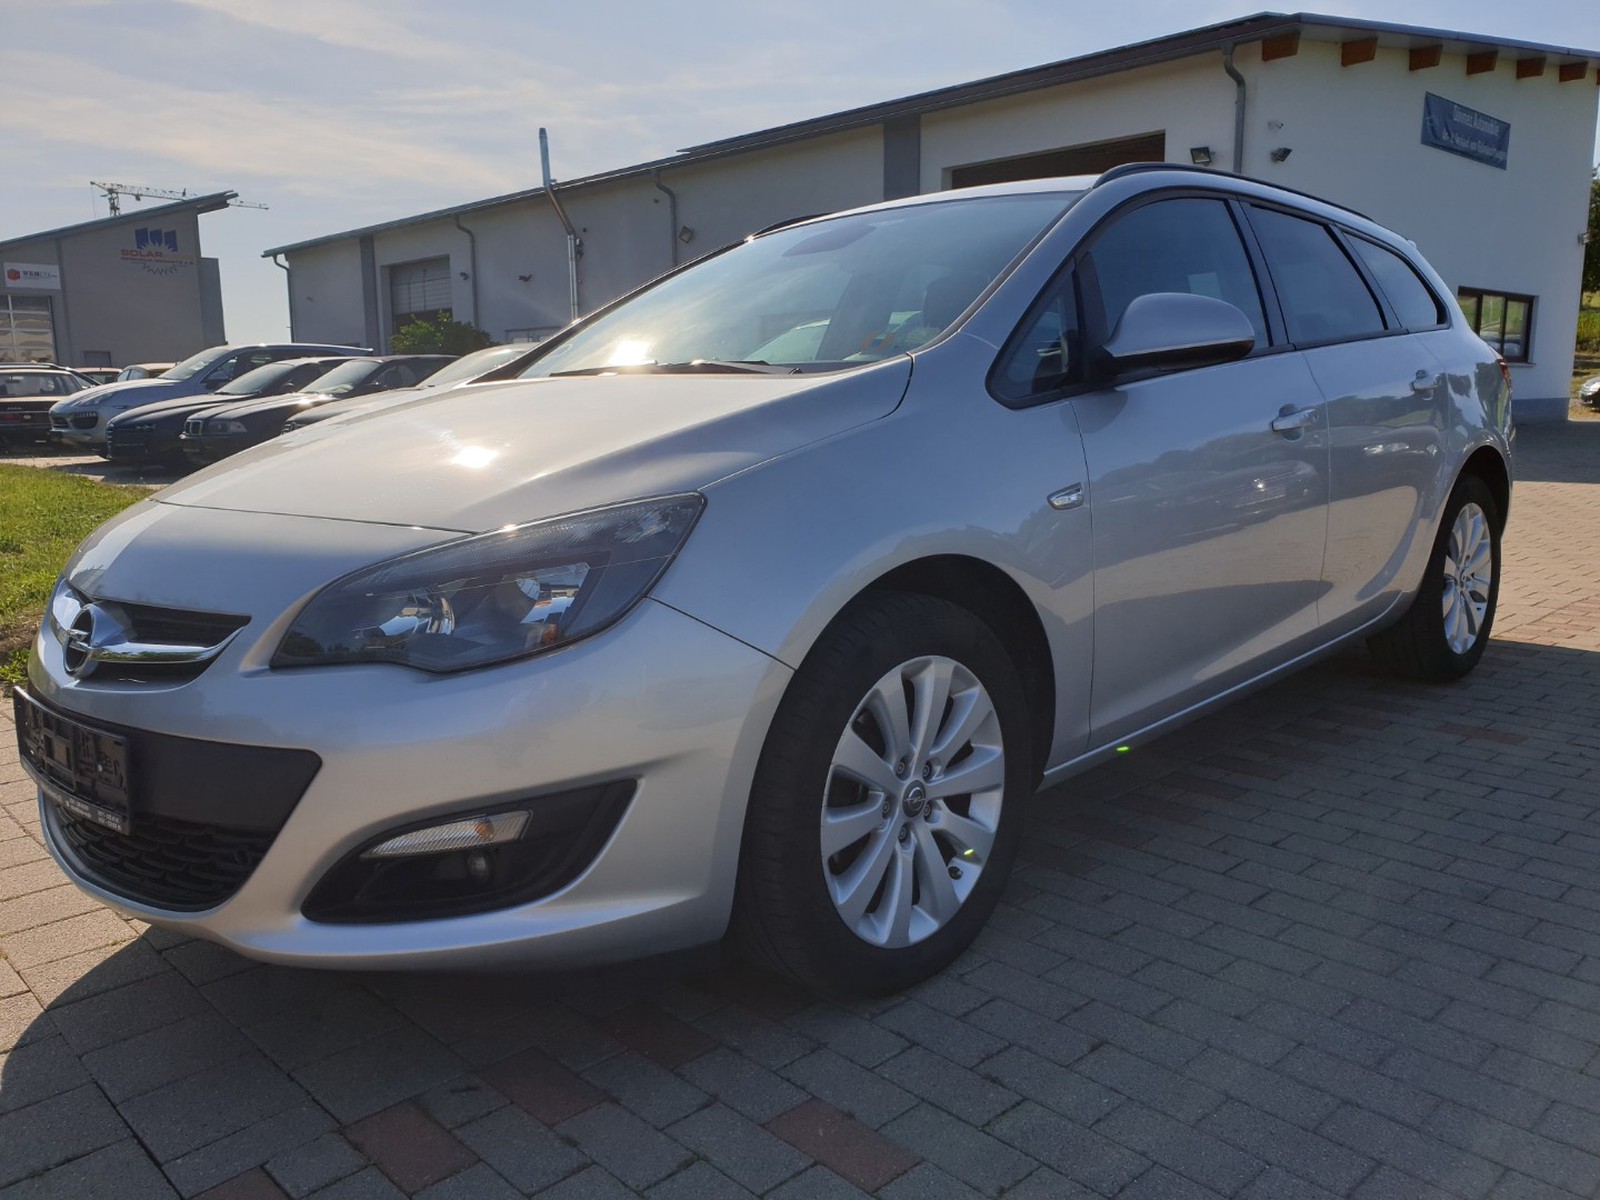 Opel Astra J 1.6 CDTI Sports Tourer used buy in Zimmern ob Rottweil -  Int.Nr.: 629 SOLD